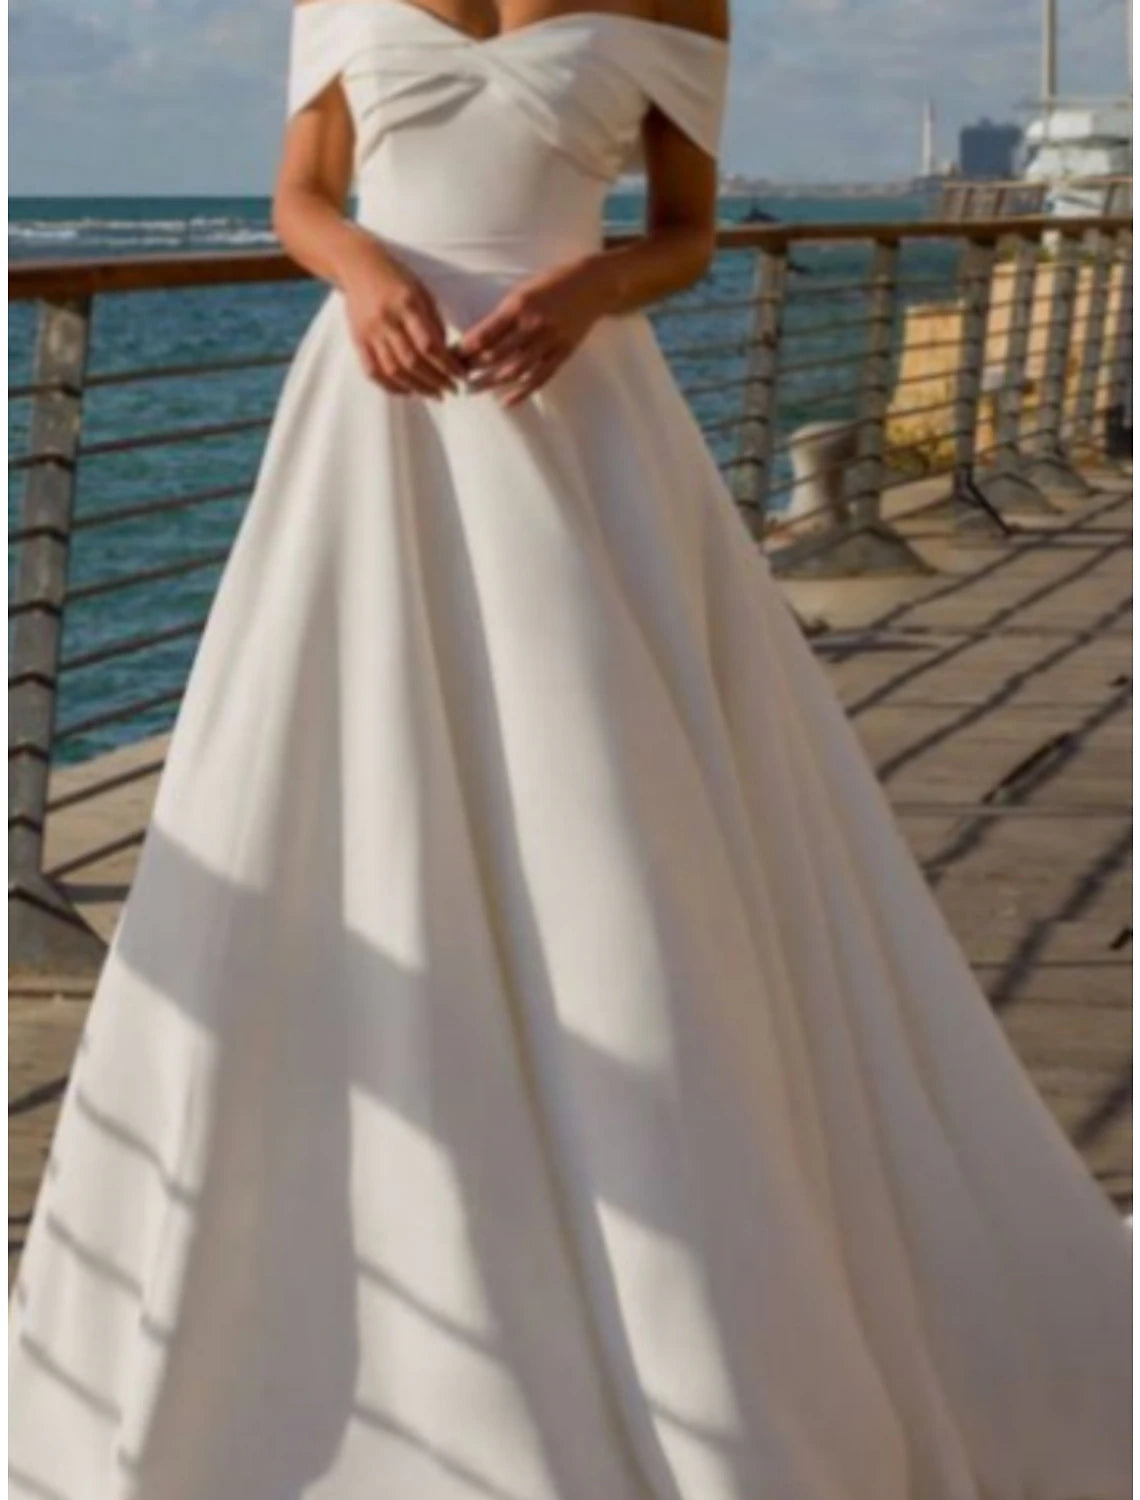 Wholesa Formal Wedding Dresses A-Line Off Shoulder Short Sleeve Court Train Satin Bridal Gowns With Pleats Ruched